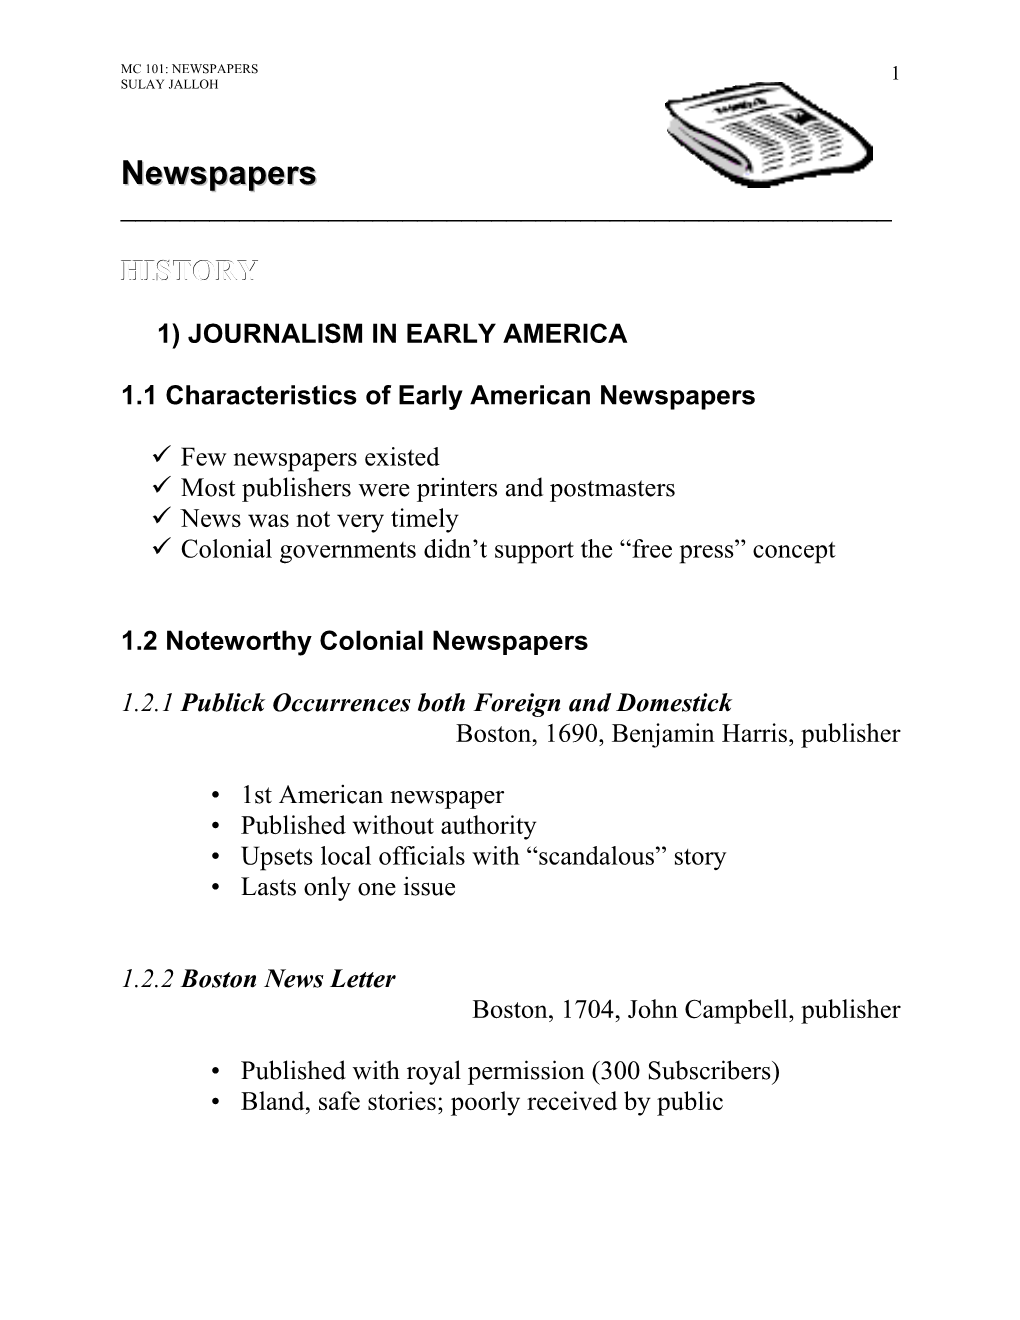 1.1 Characteristics of Early American Newspapers